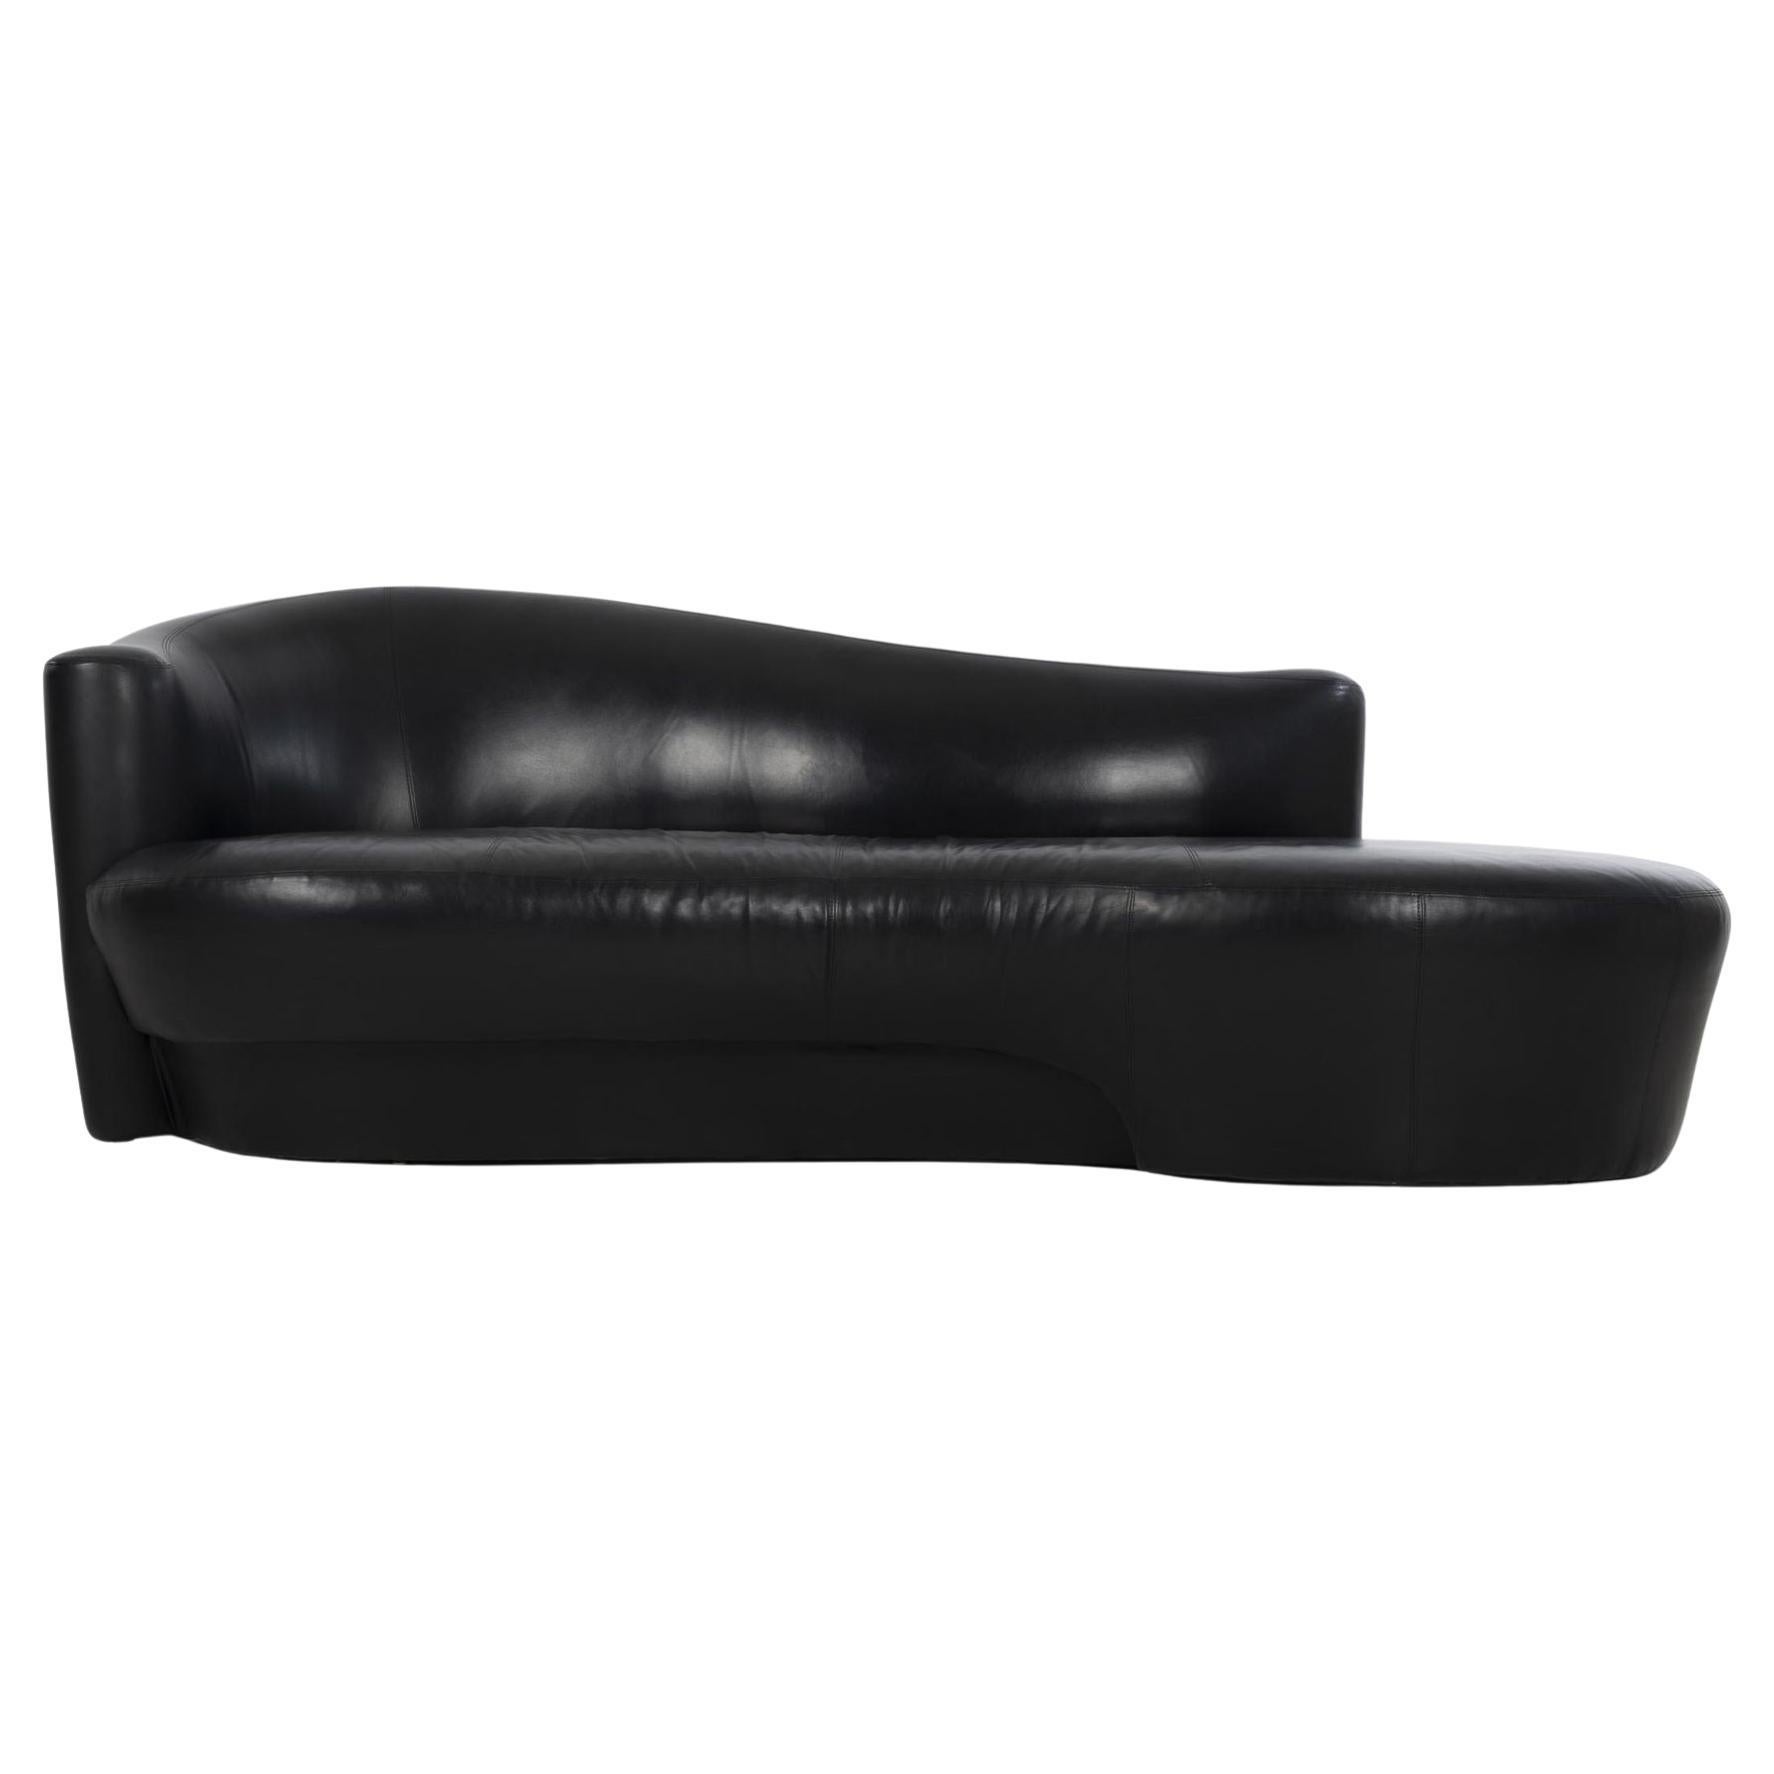 Weiman Black Leather Sofa For Sale